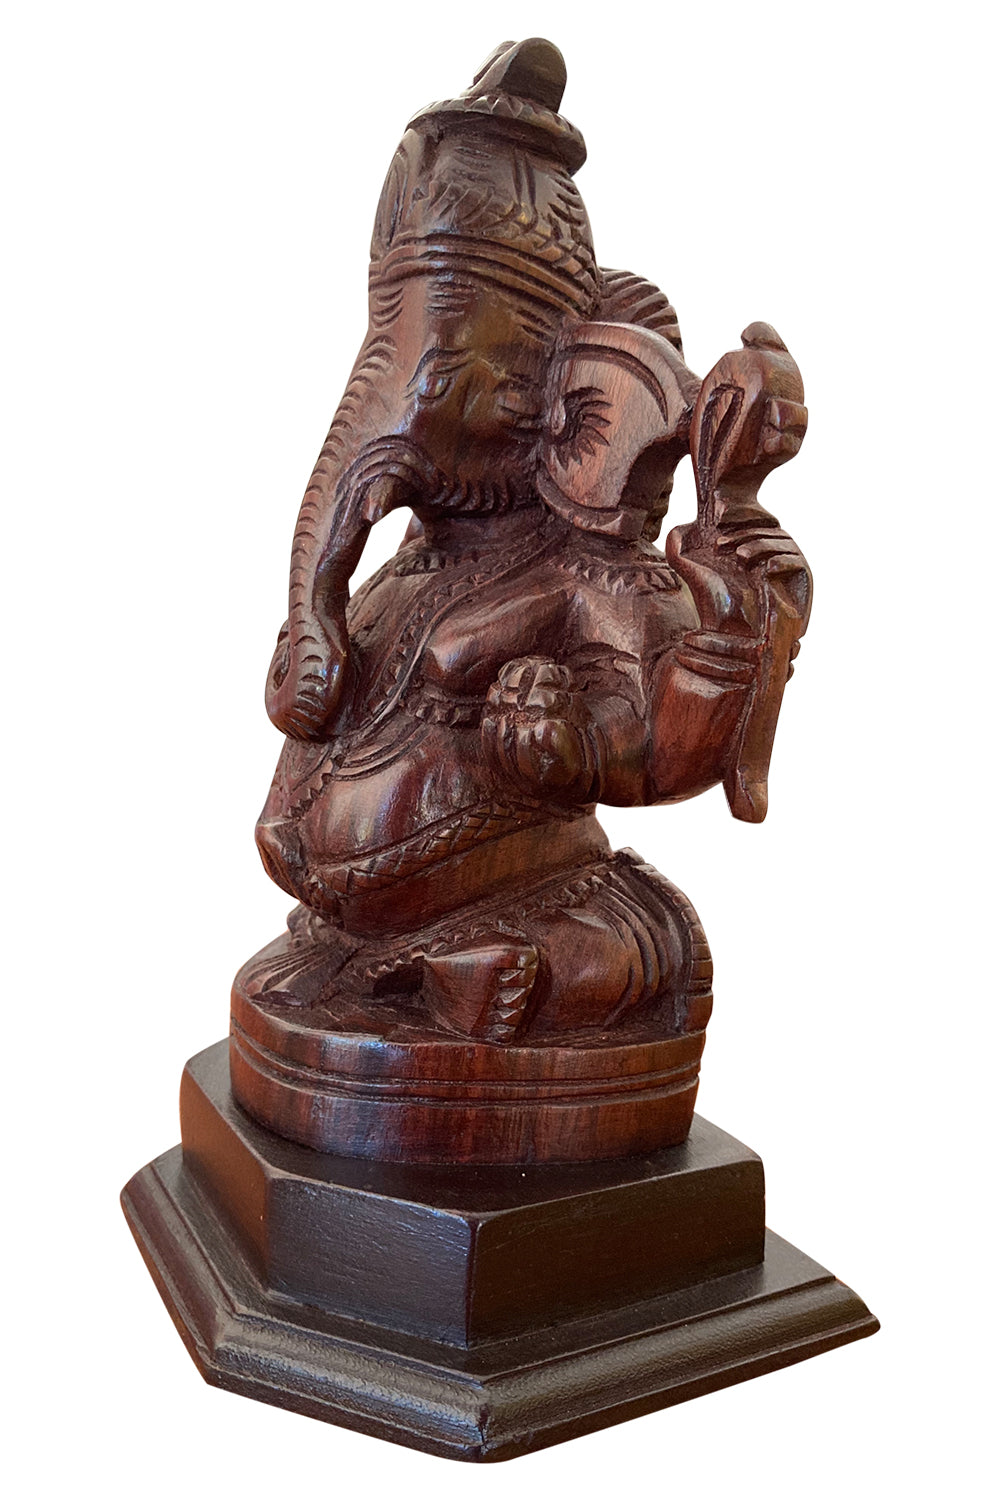 Southloom Handmade Ganesha Handicraft 10 inches (Carved from Rose Wood)